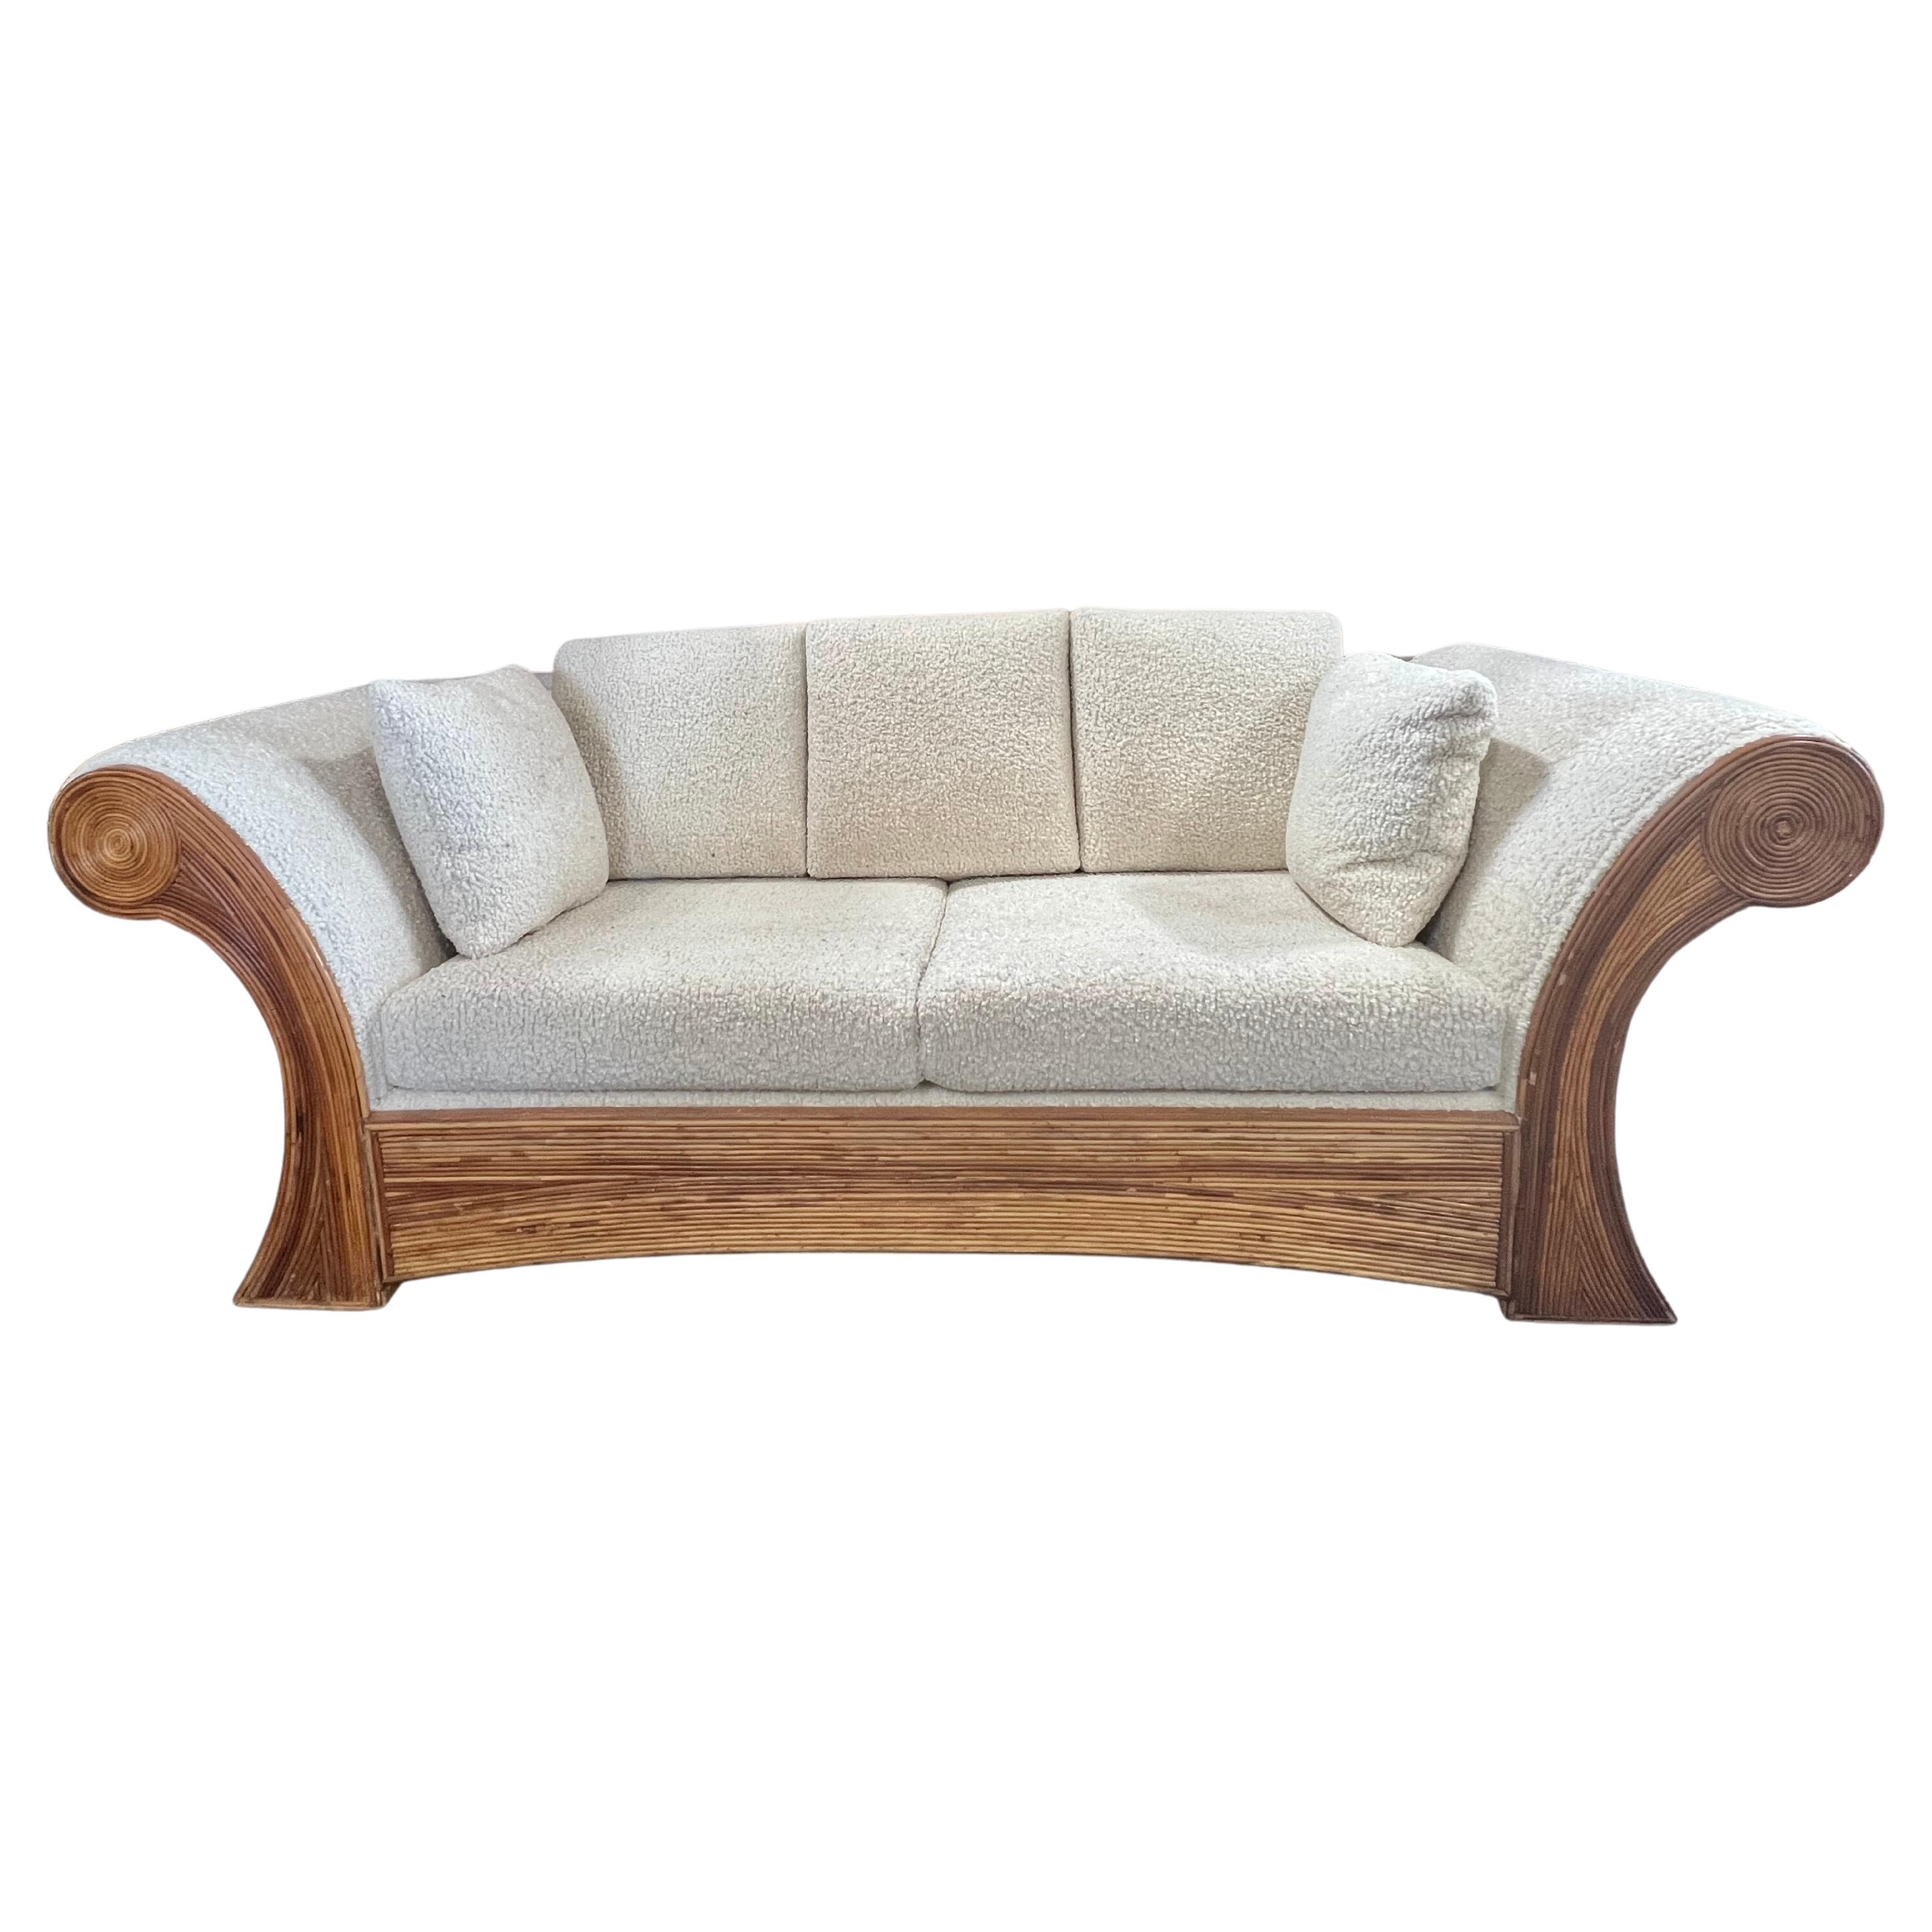 1960’s Italian Pencil Reed Sofa by Arpex For Sale